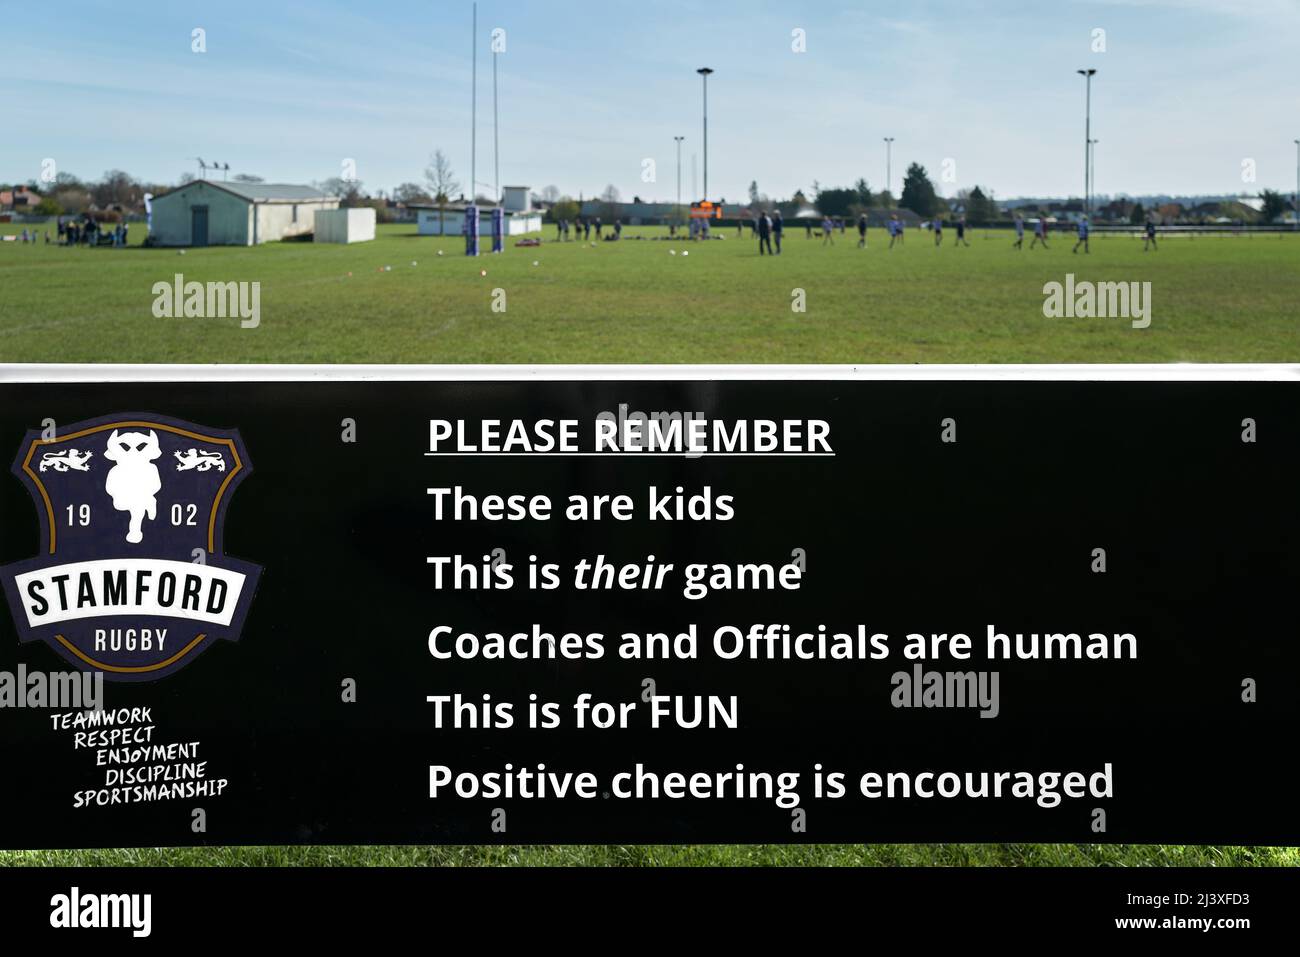 Rugby notice at Stamford rugby club: this is a kids' game for fun, coaches and officials are human, positive cheering is encouraged. Stock Photo